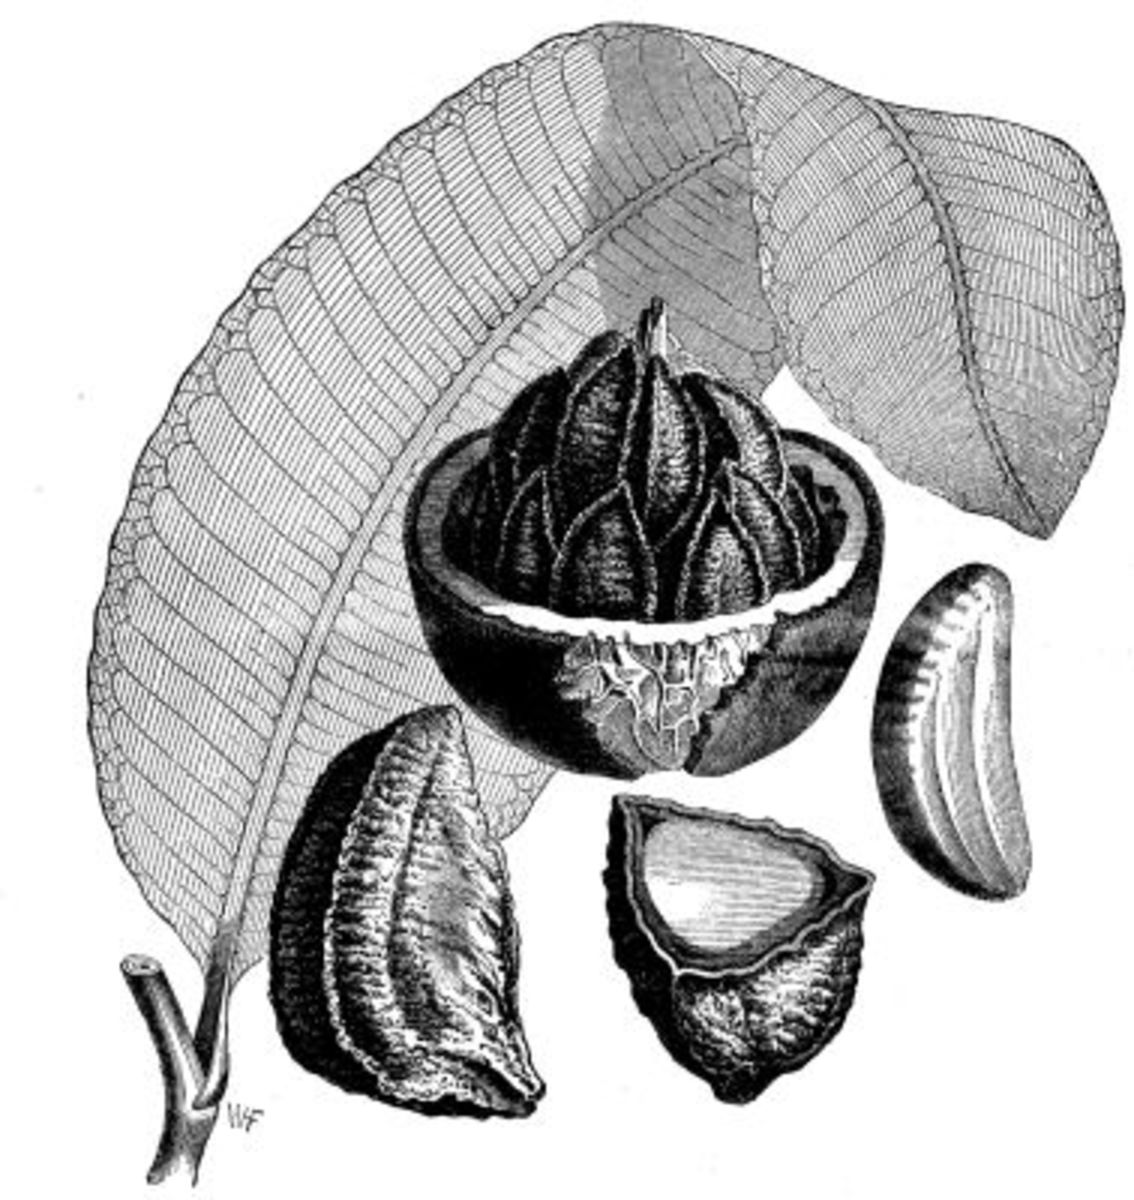 Depiction of the Brazil nut in Scientific American Supplement, No. 598, June 18, 1887